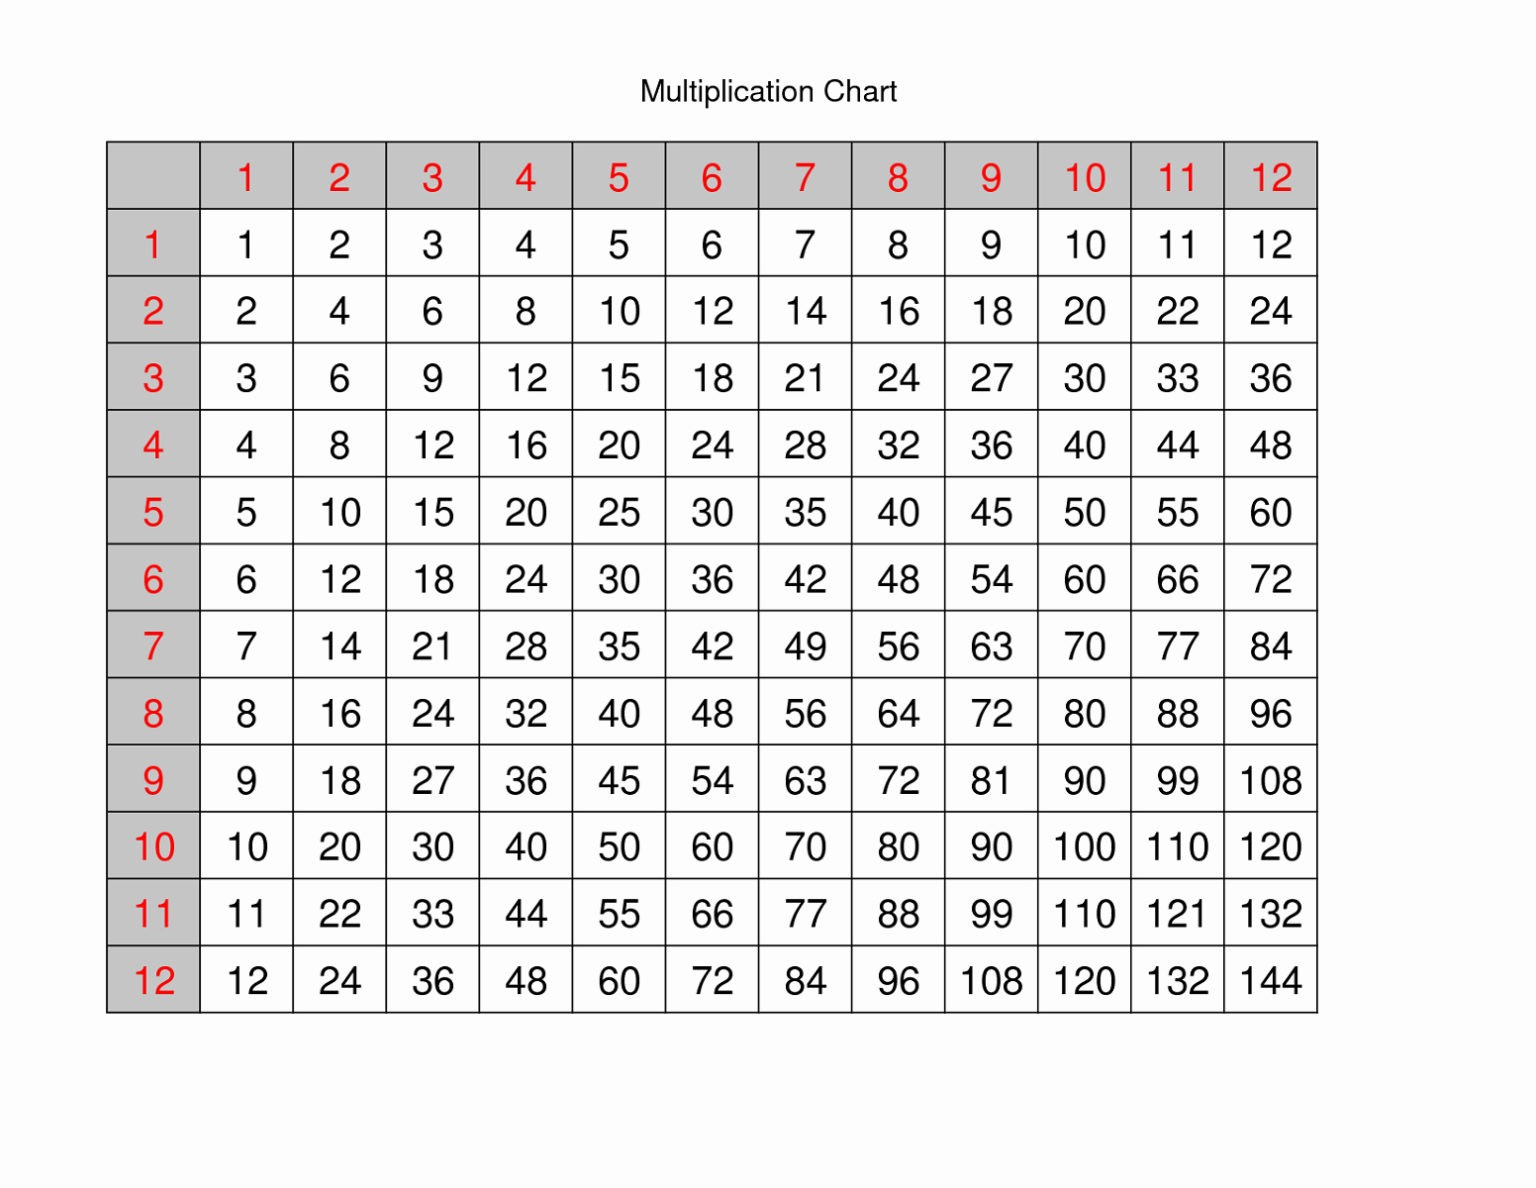 12 times table up to 100